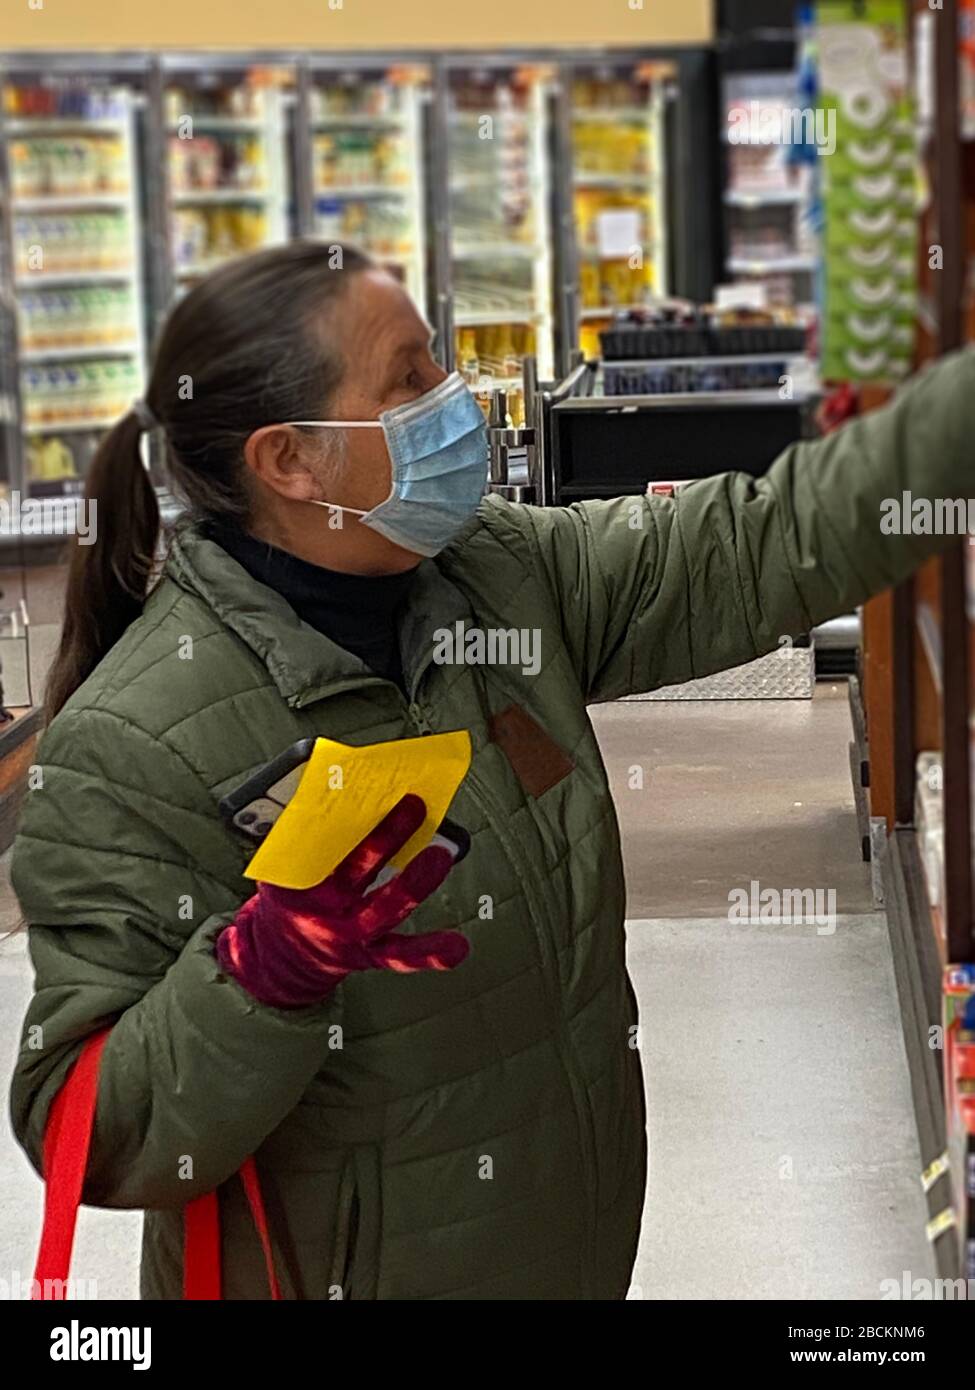 A middle aged woman is food shopping with a surgical mask on during the covid-19 pandemic Stock Photo